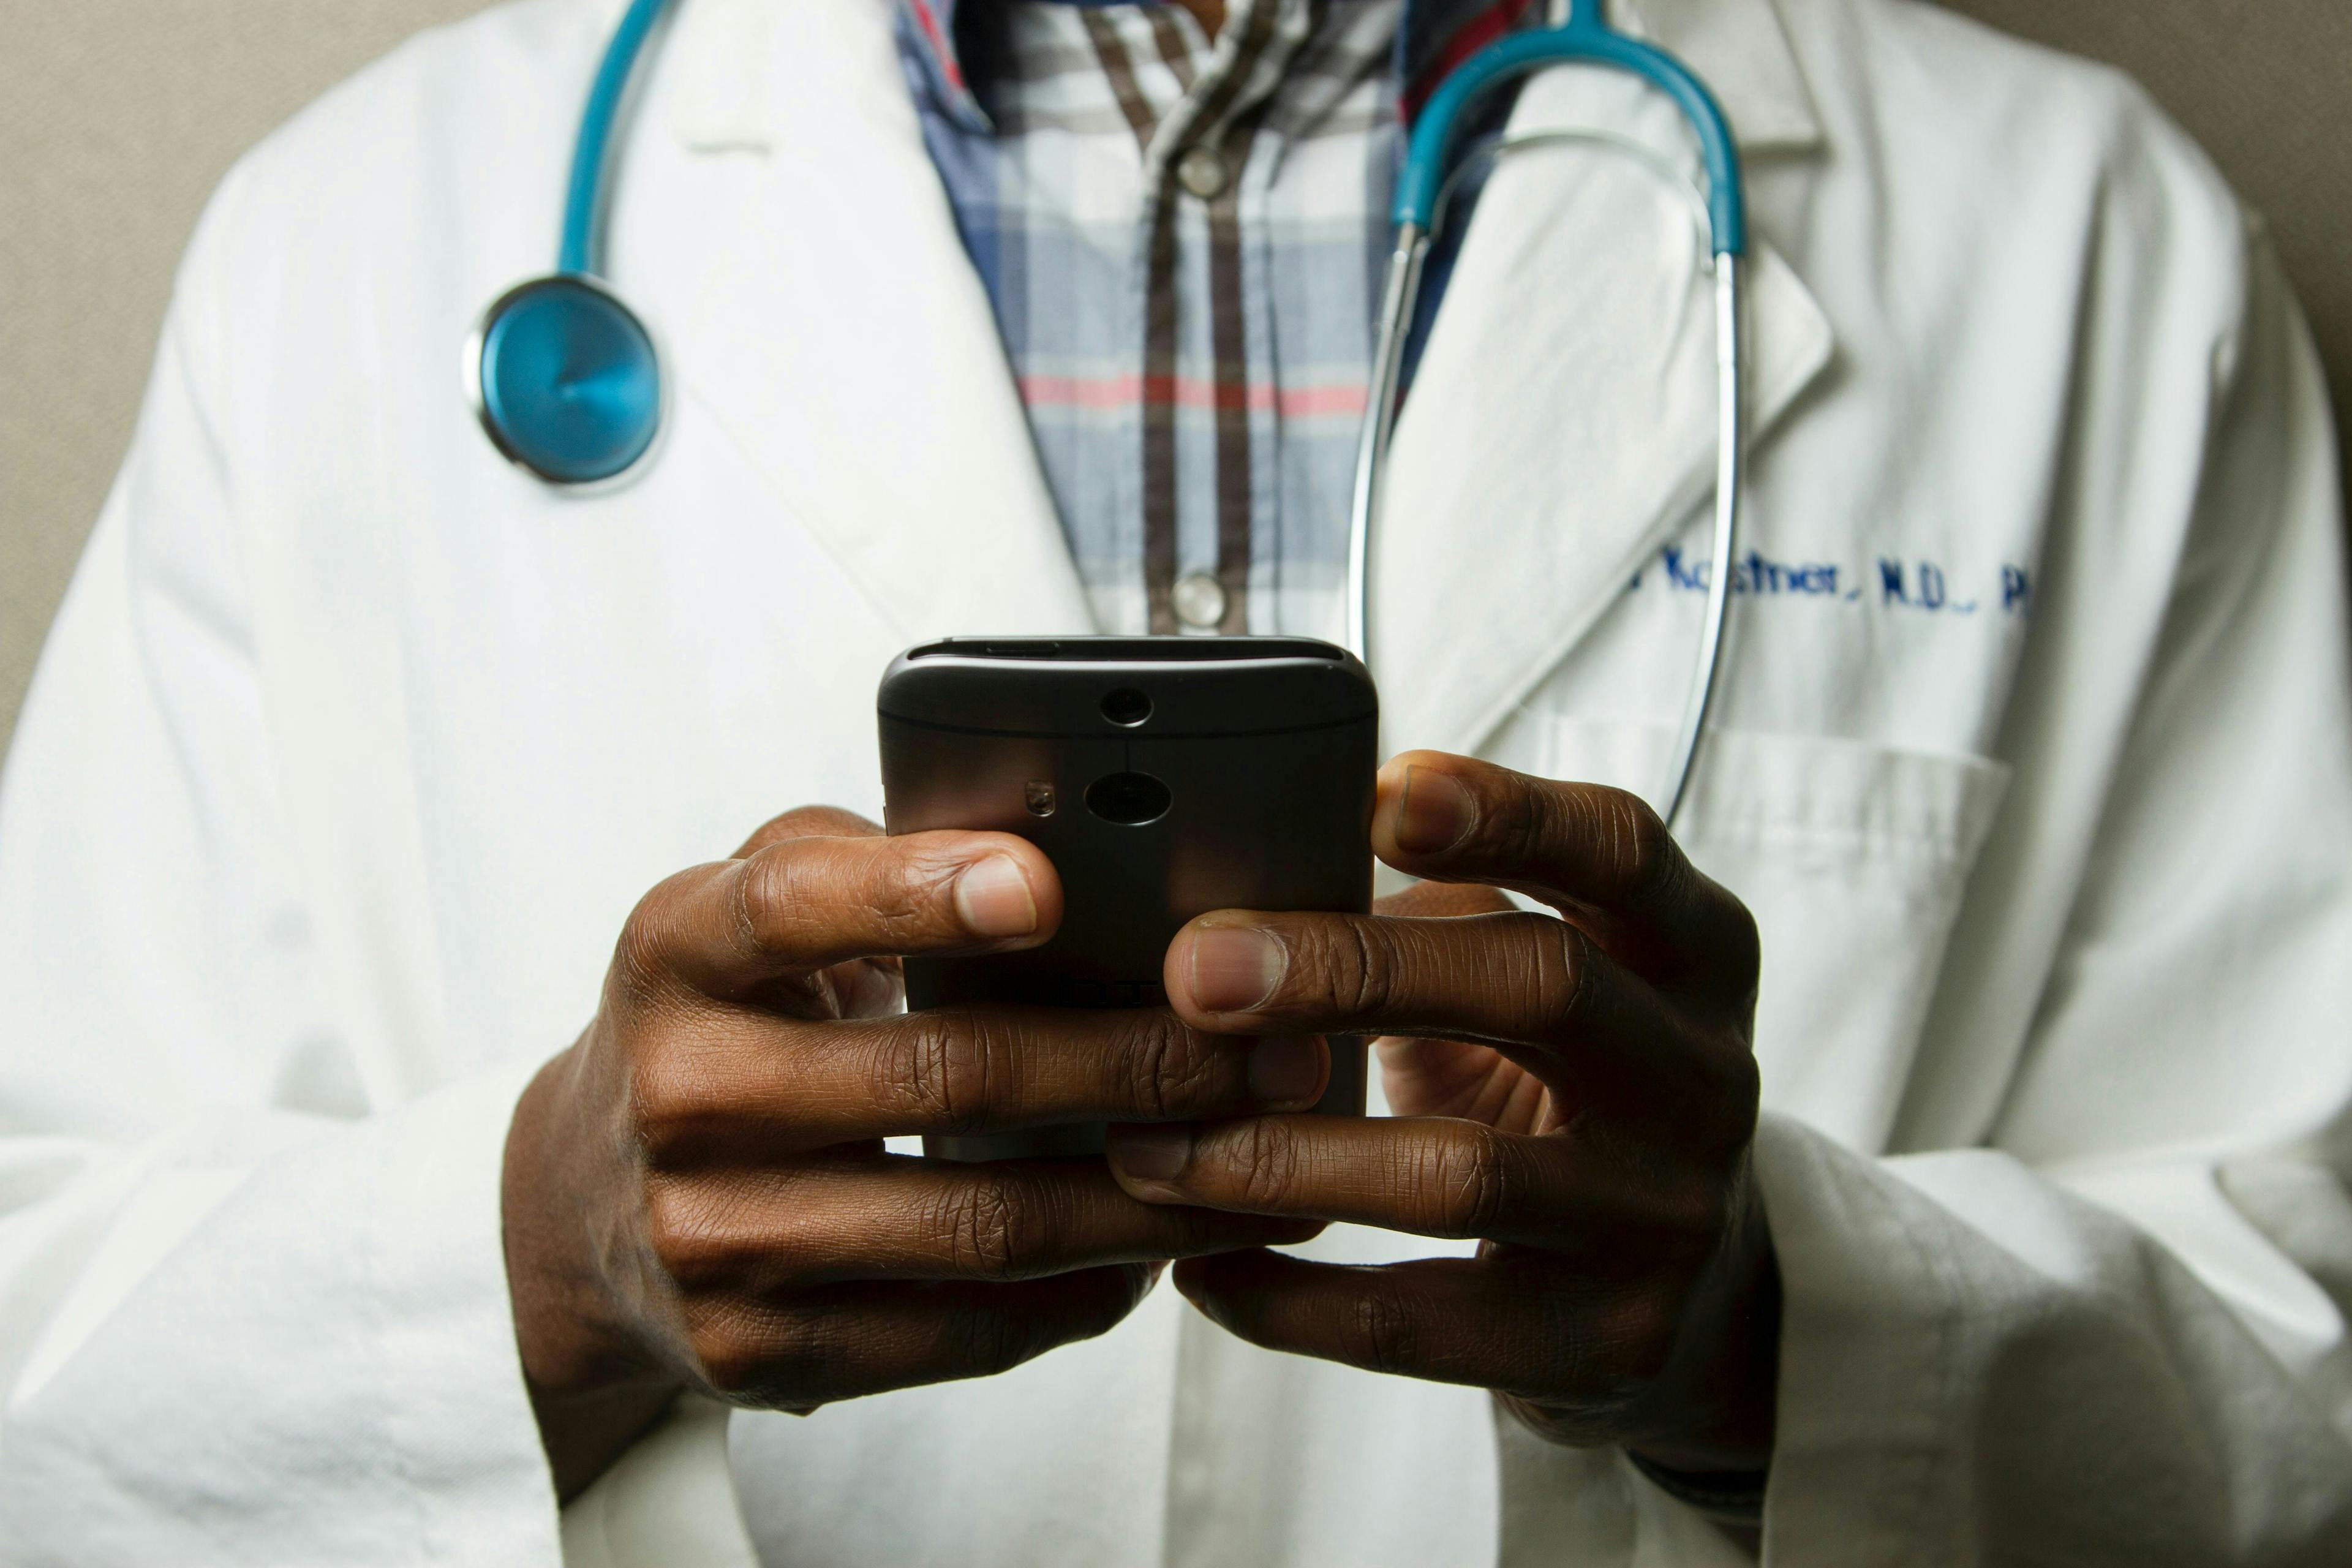 A person in a white lab coat with a stethoscope uses a smartphone; the background is a plain, neutral color.